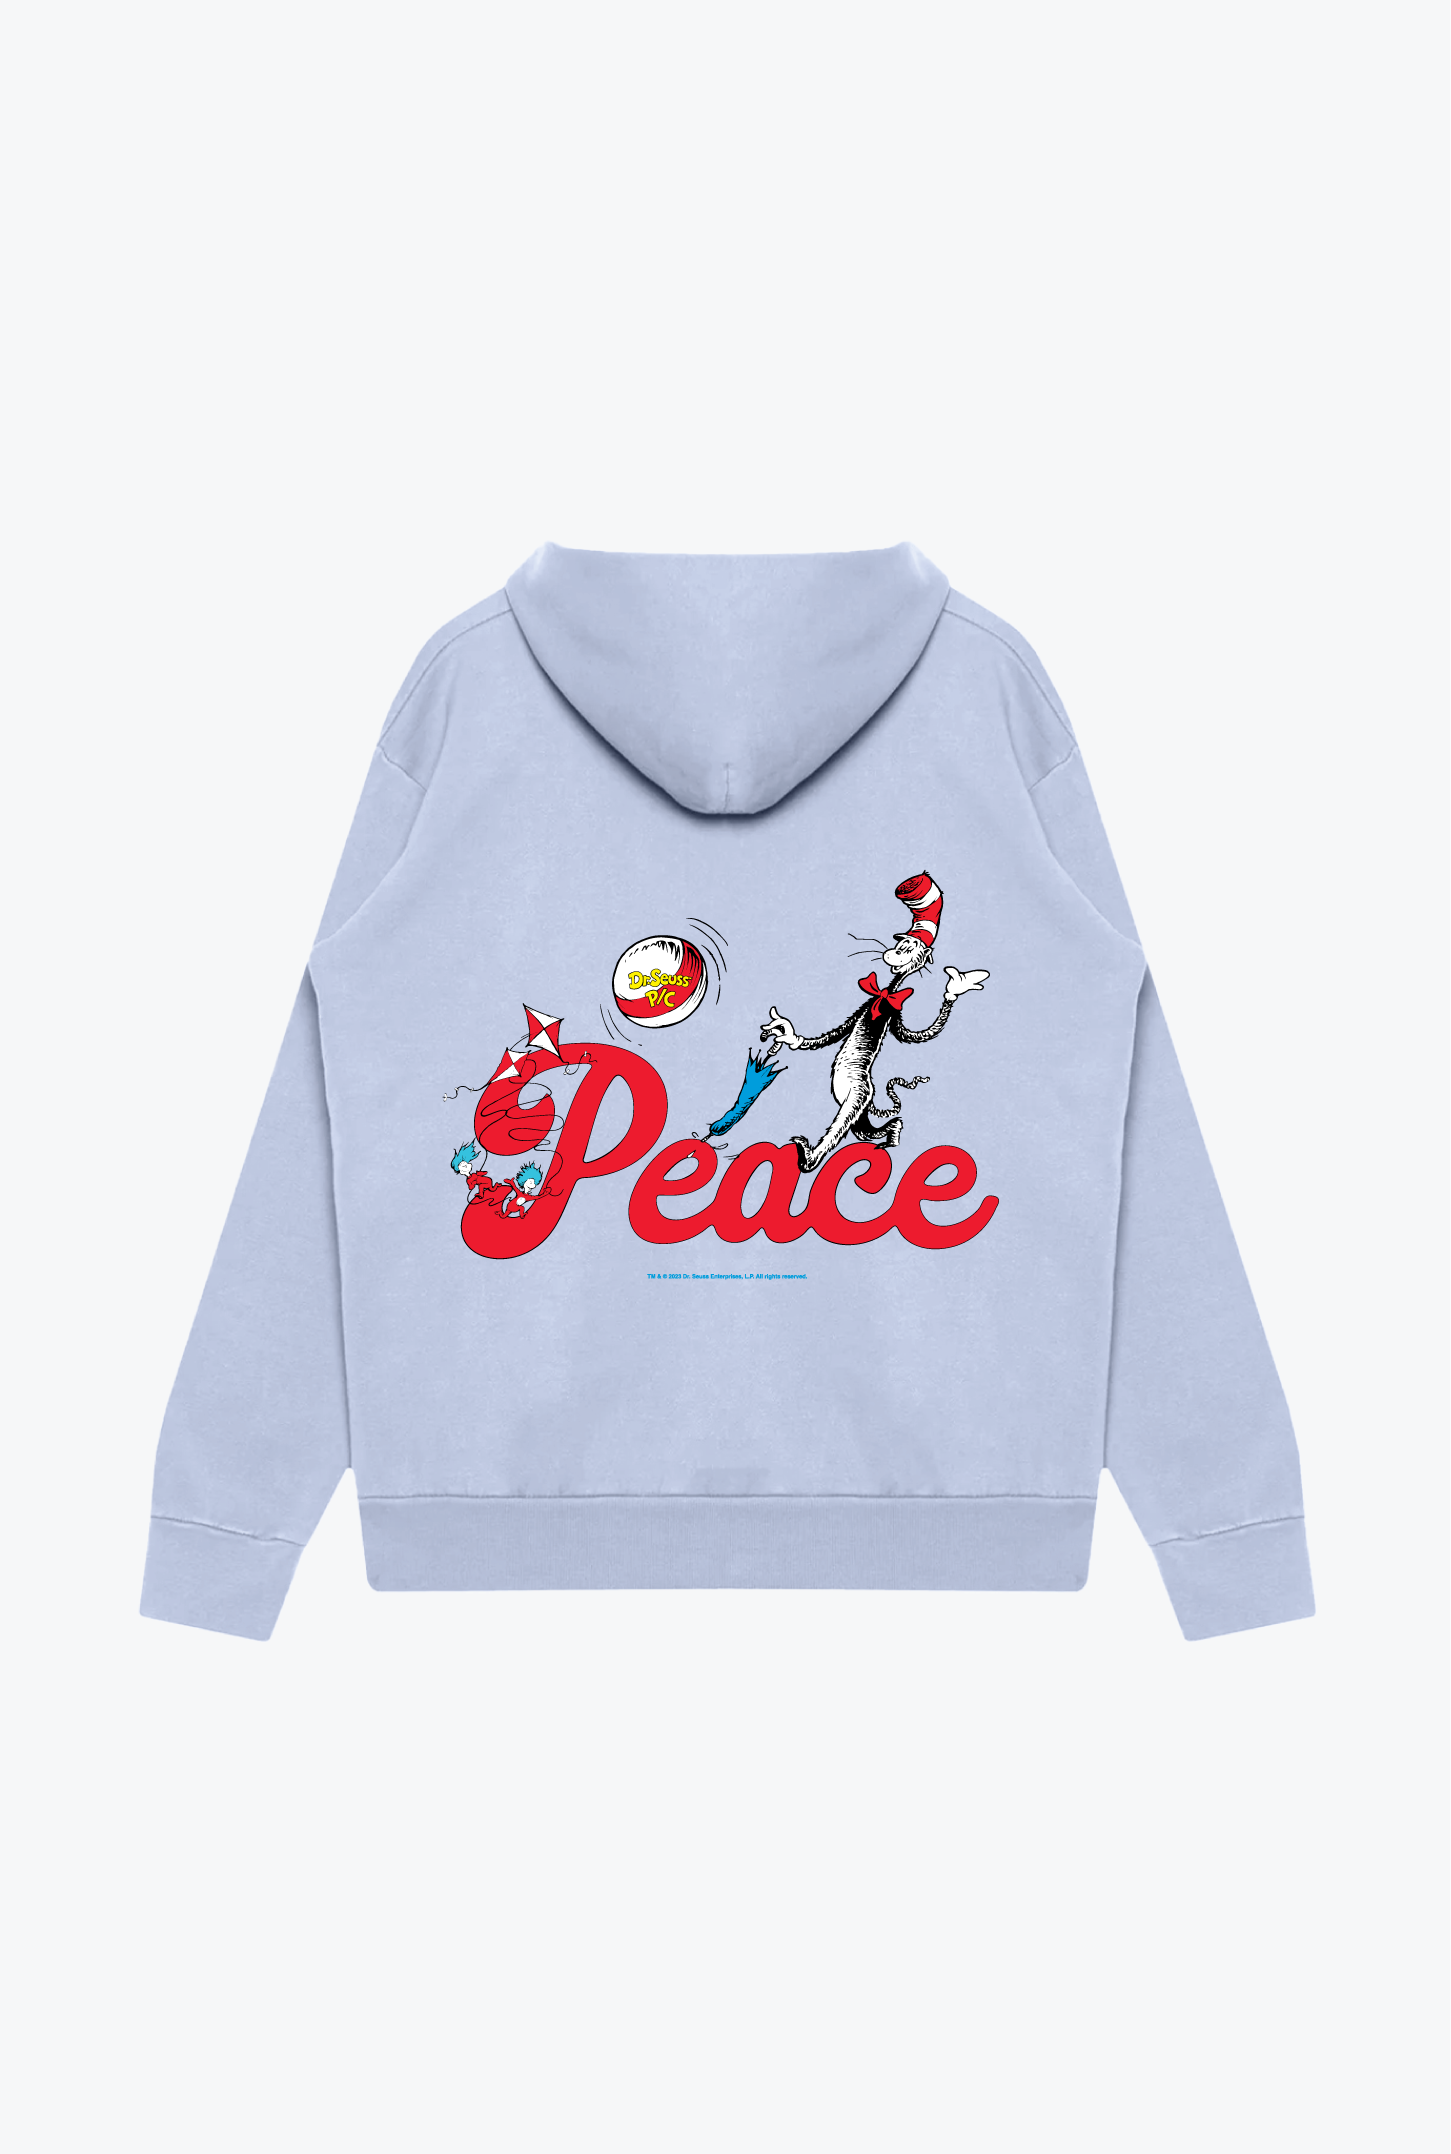 Cat In The Hat Vintage Character Hoodie - Grape Ice